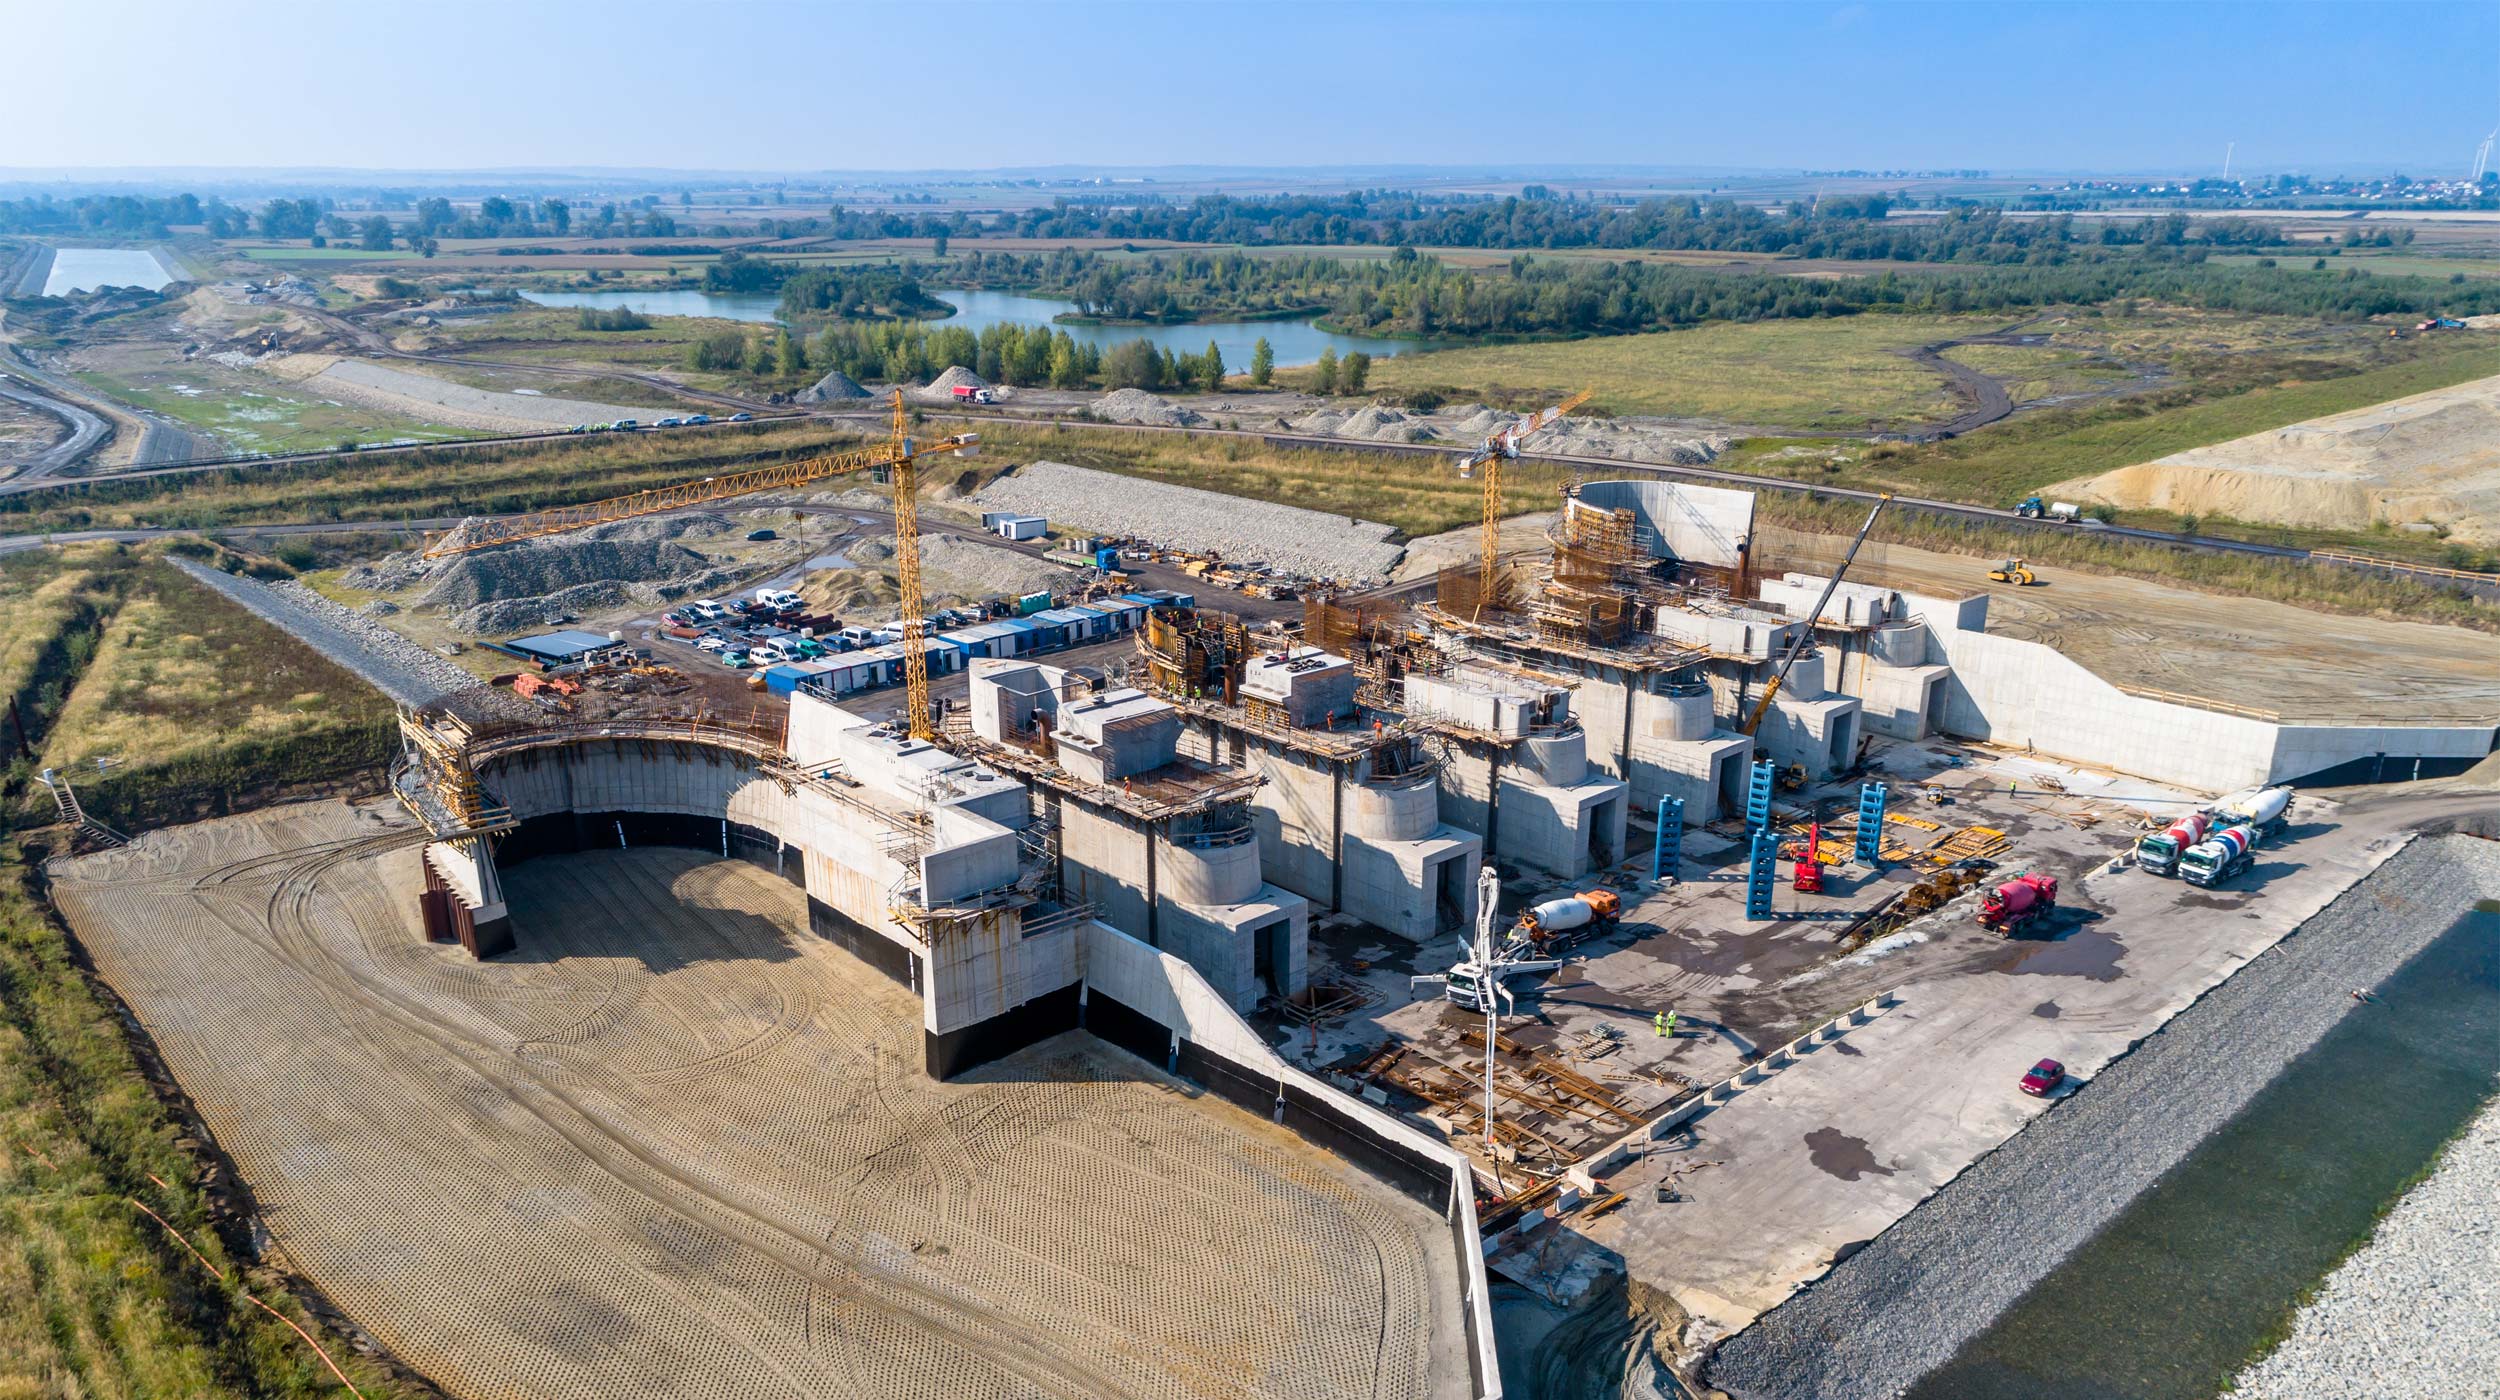 The Racibórz Dolny Dam, designed to control flooding in the area, will have a total holding capacity of 170 million cubic metres, placing it at the forefront of such projects in Poland.